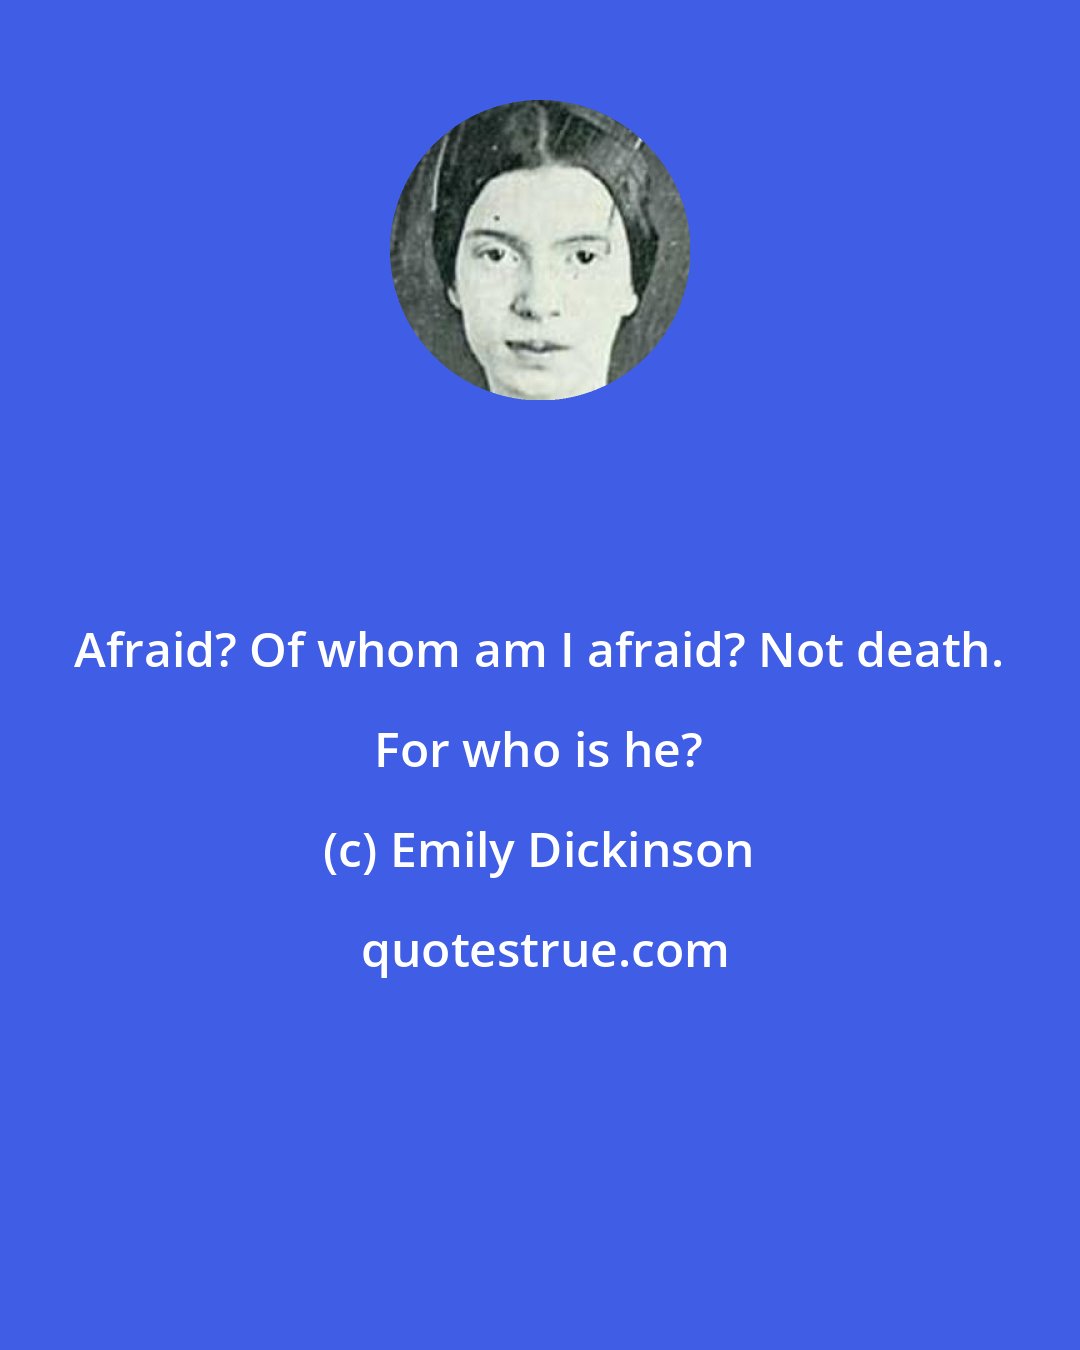 Emily Dickinson: Afraid? Of whom am I afraid? Not death. For who is he?